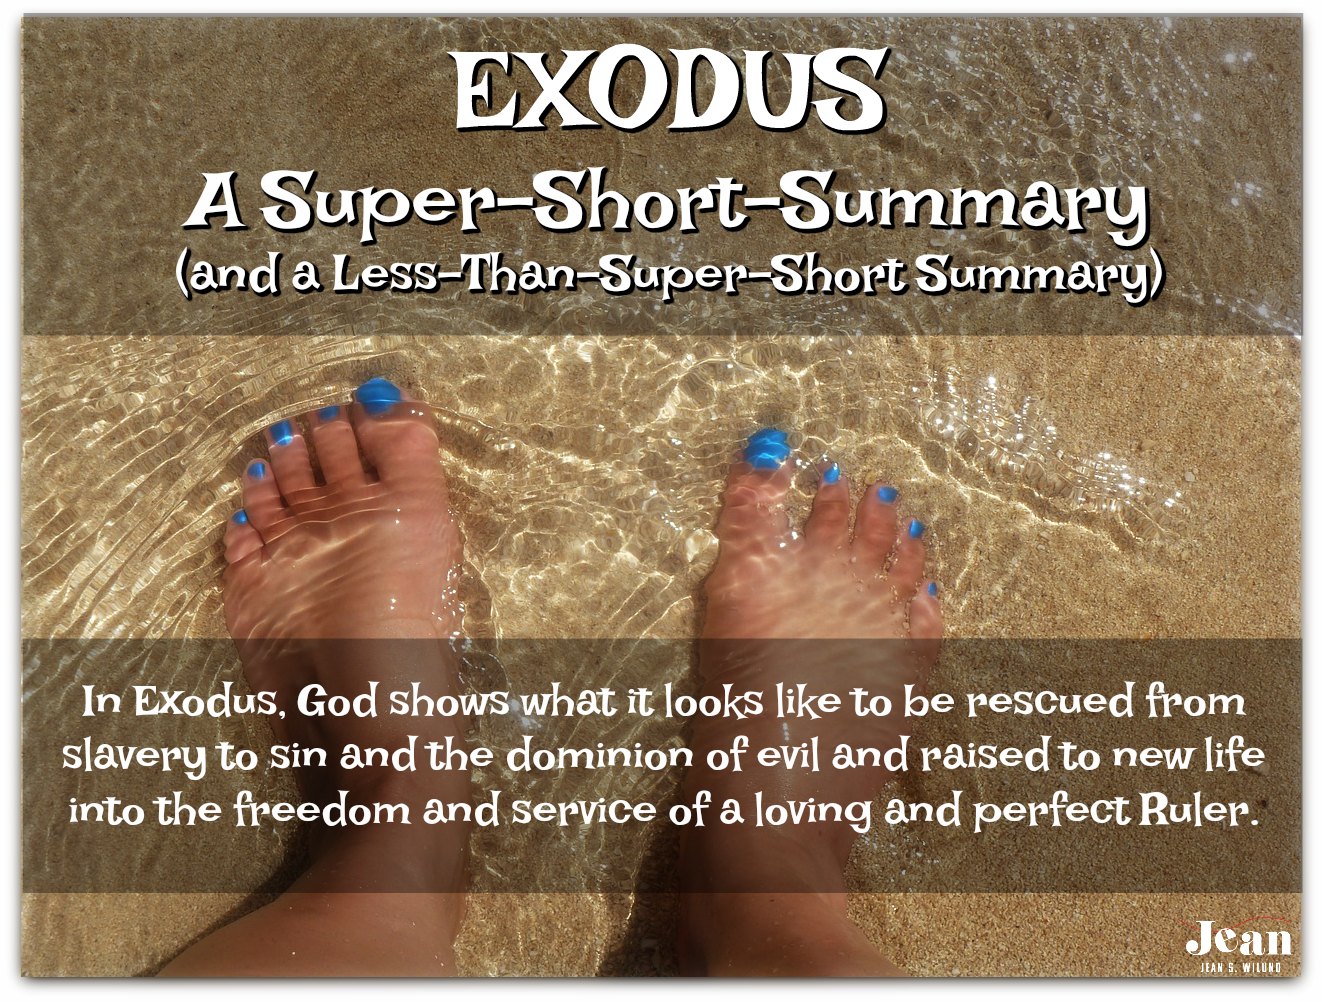 EXODUS - A Super-Short Summary and Less-Than-Super-Short Summary (Welcome to the Bible series) via www.JeanWilund.com